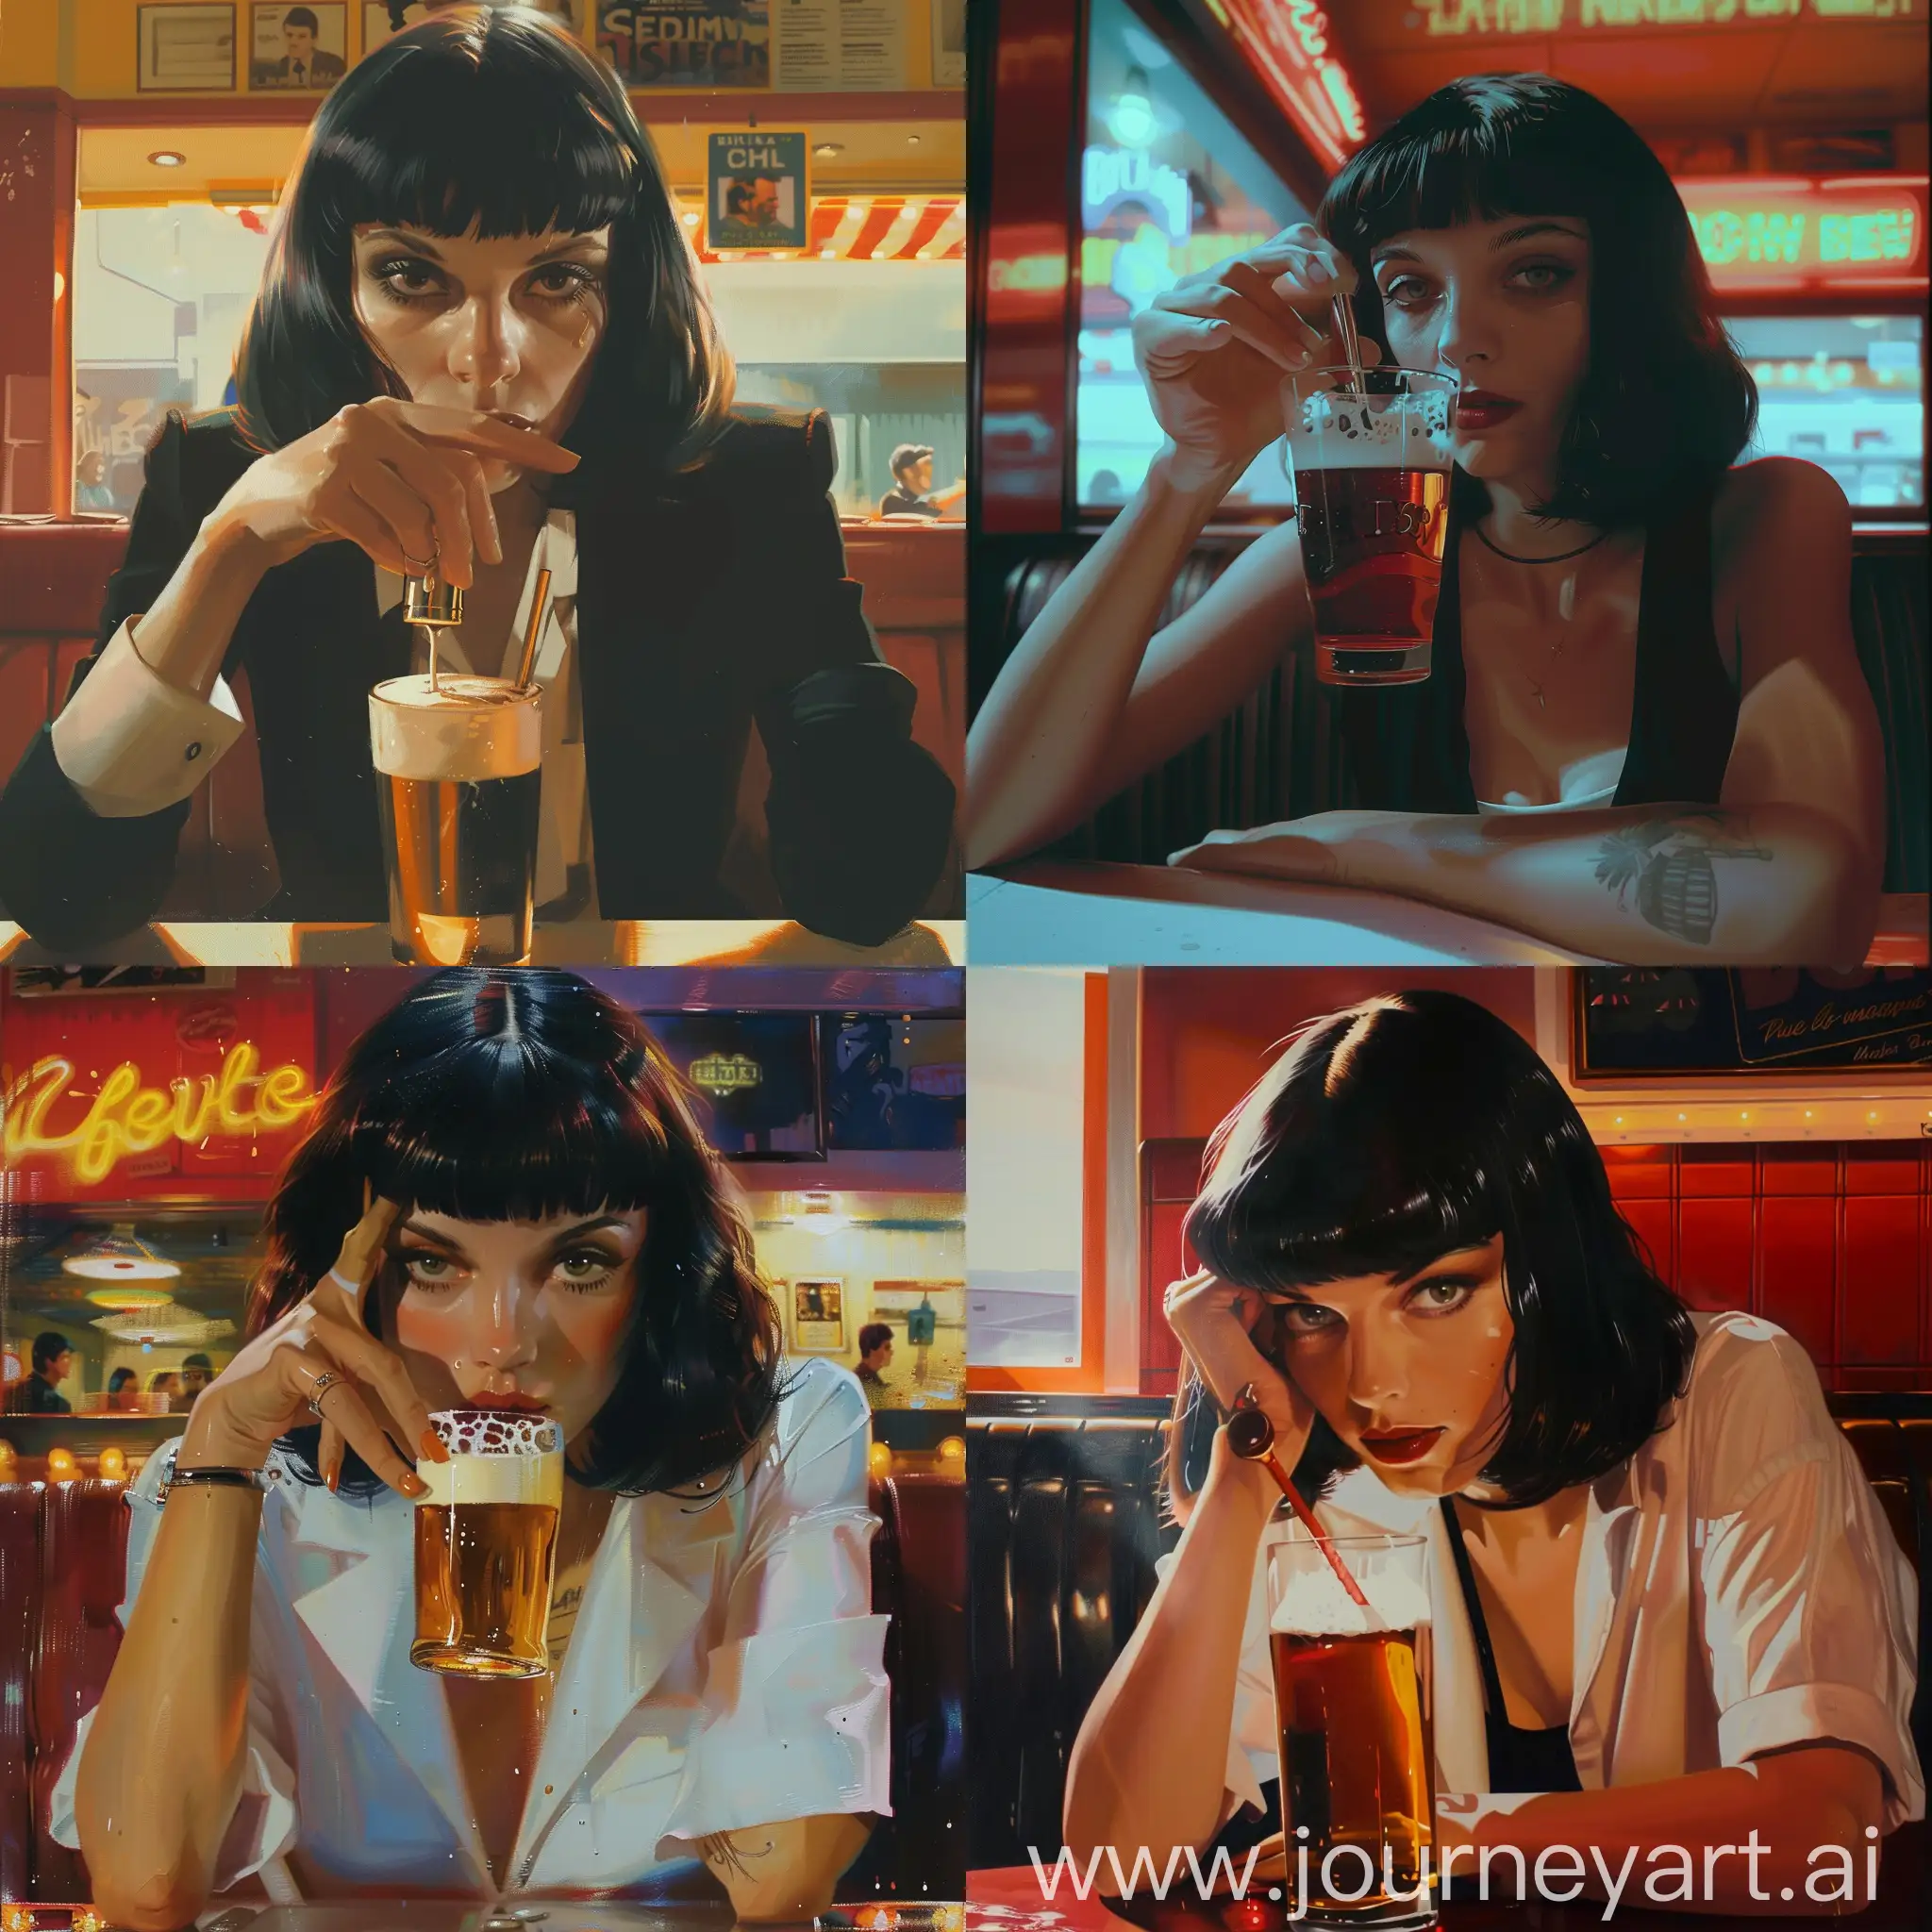 Mia-Wallace-Drinking-Beer-in-Retro-Diner-Scene